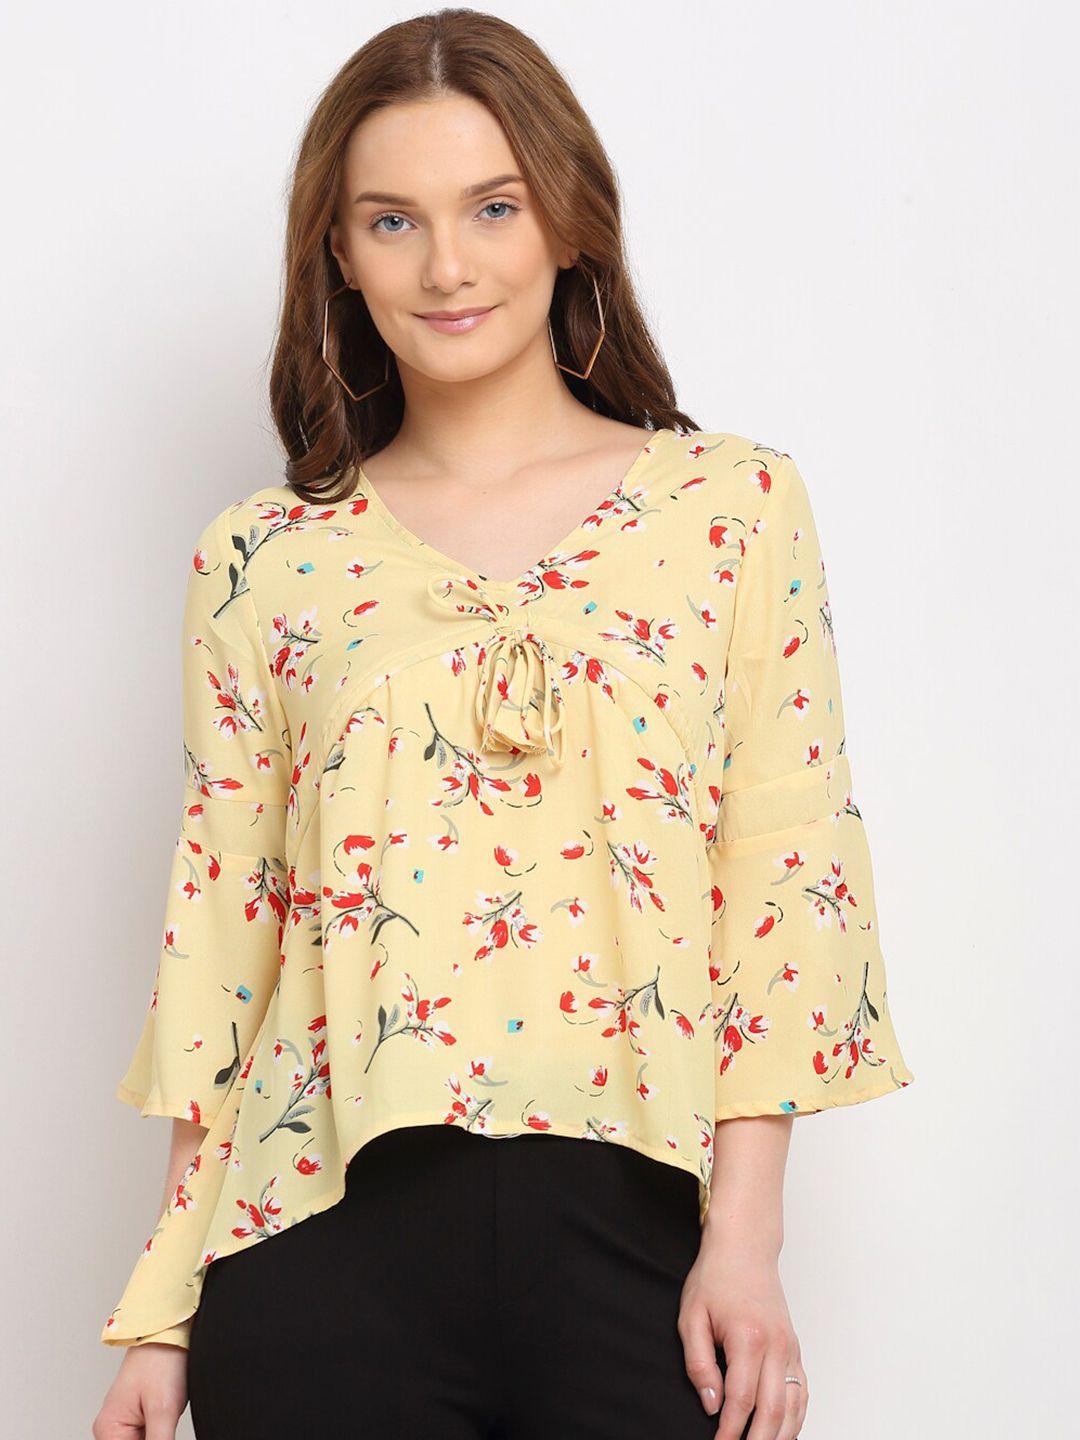 la-zoire-yellow-&-red-floral-printed-high-low-top